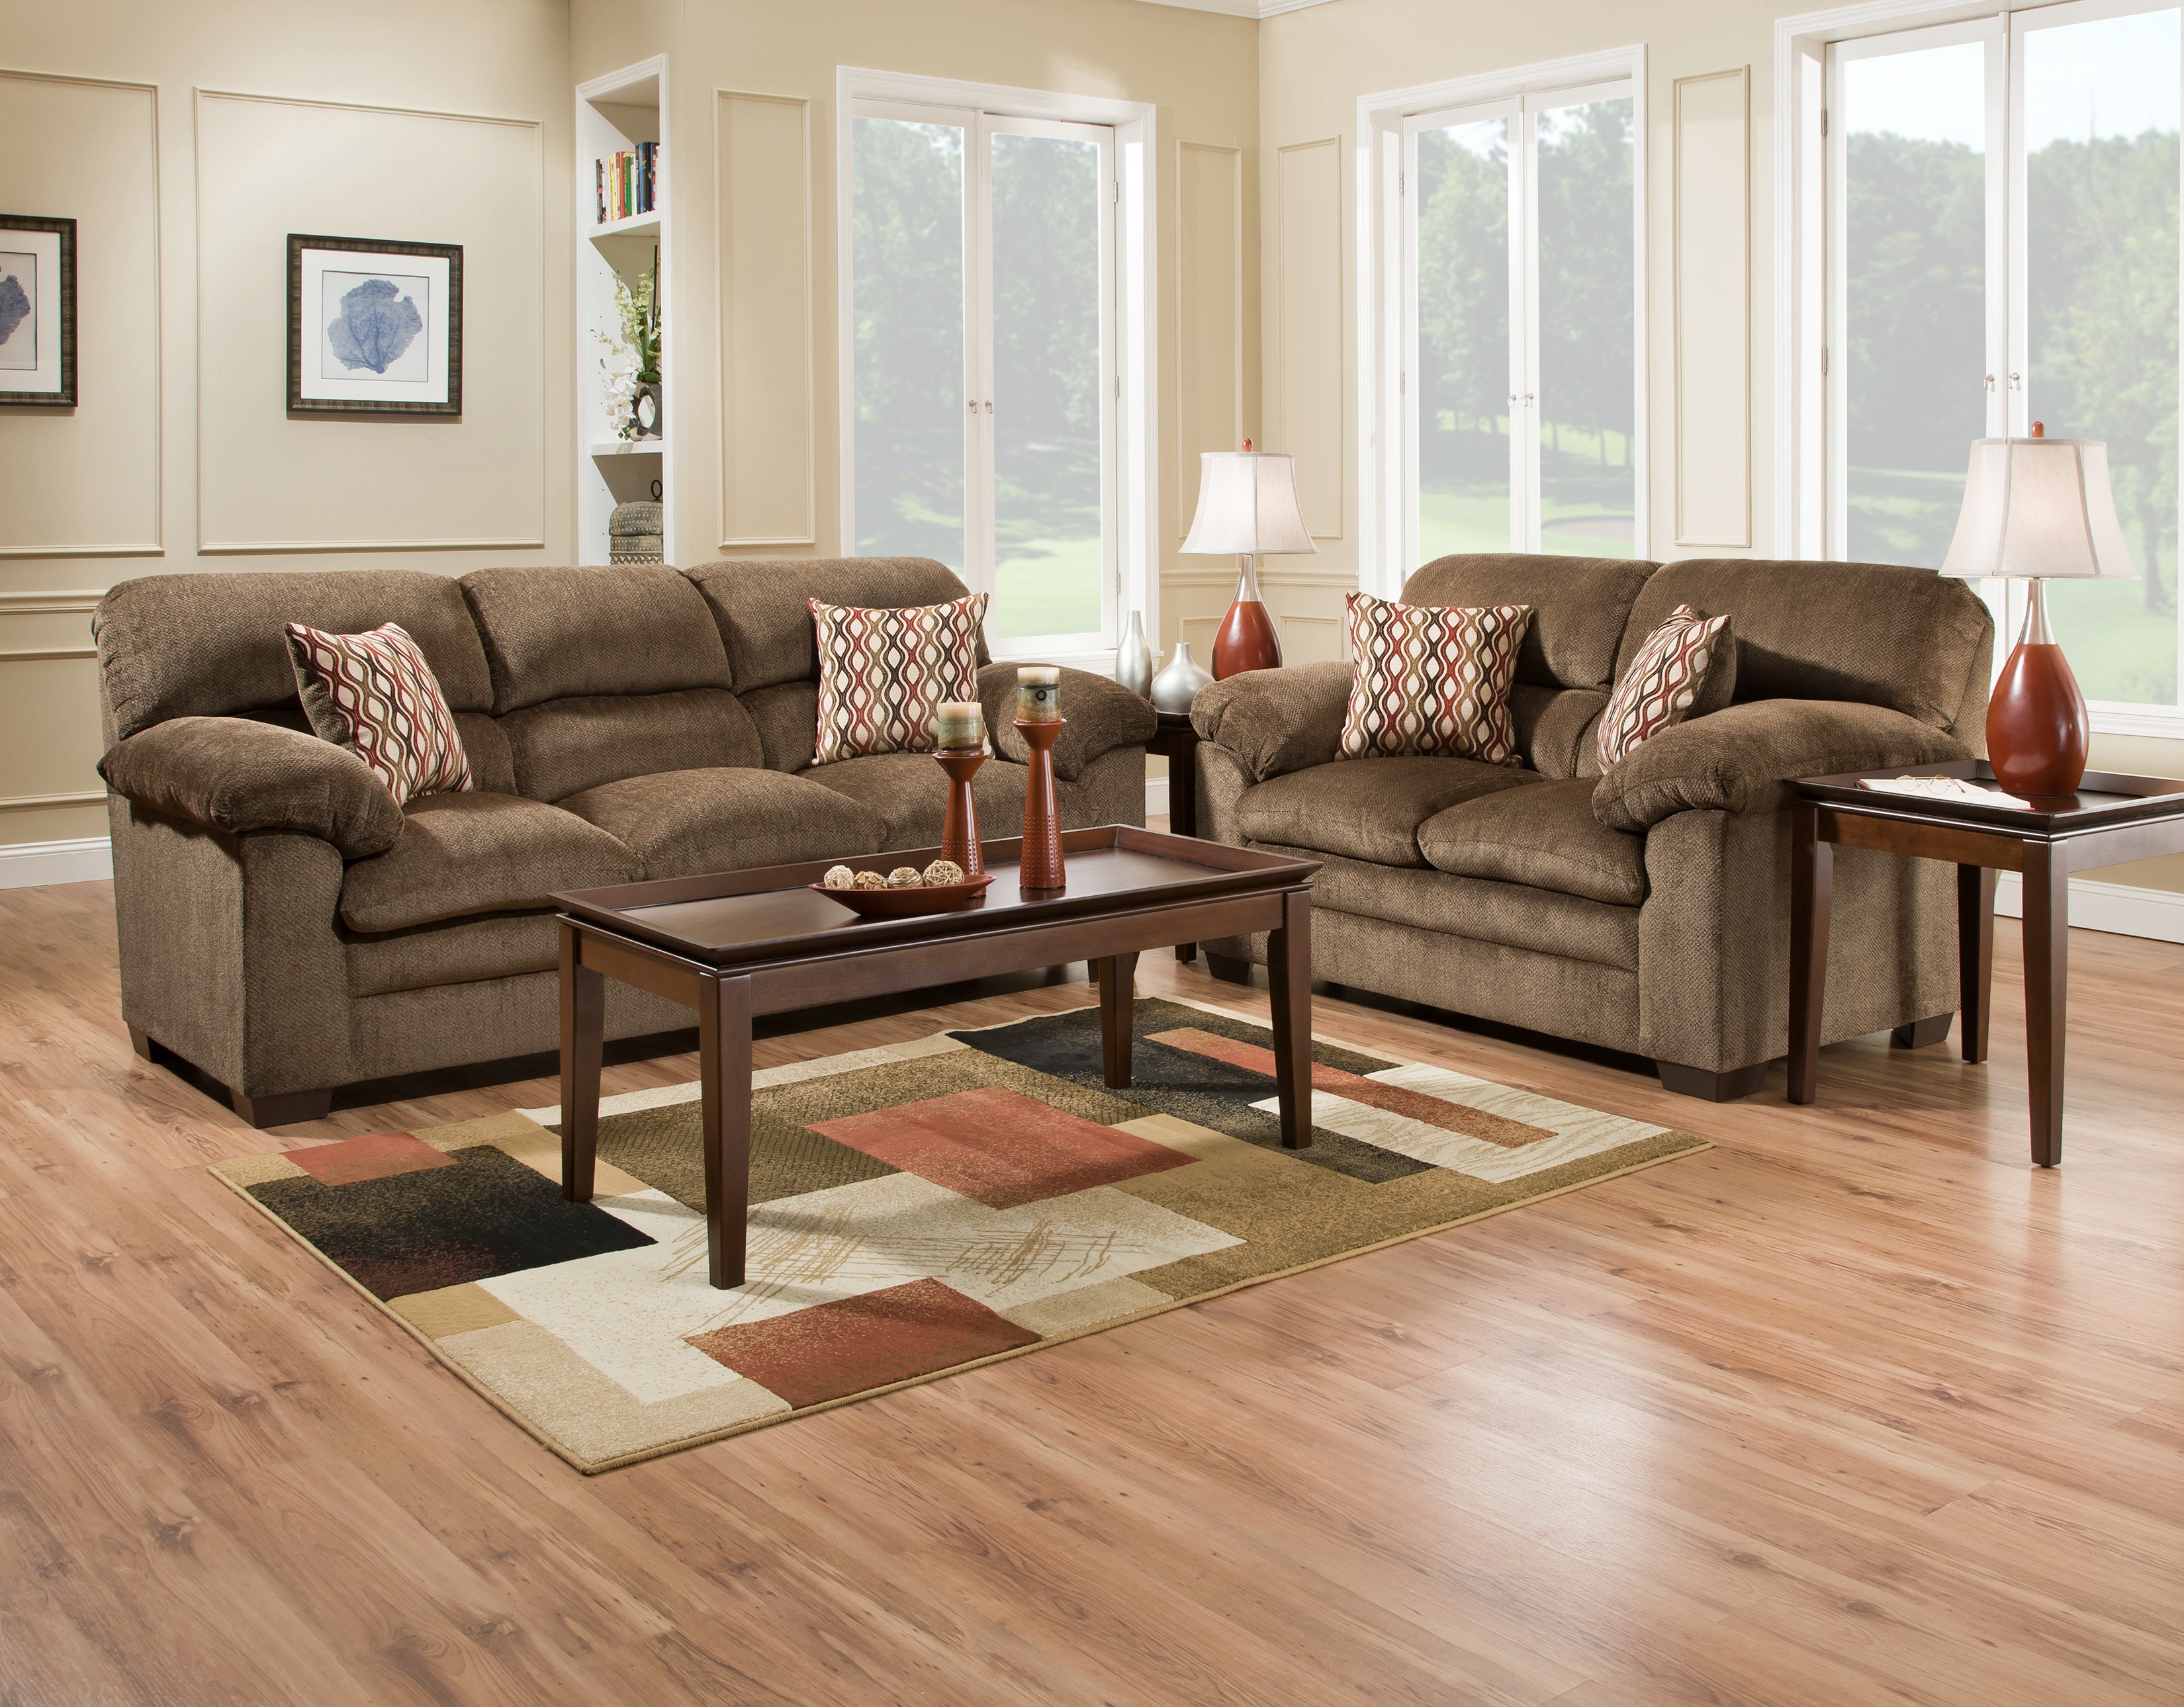 Harlow 2 Piece Living Room Group - Farmers Home Furniture